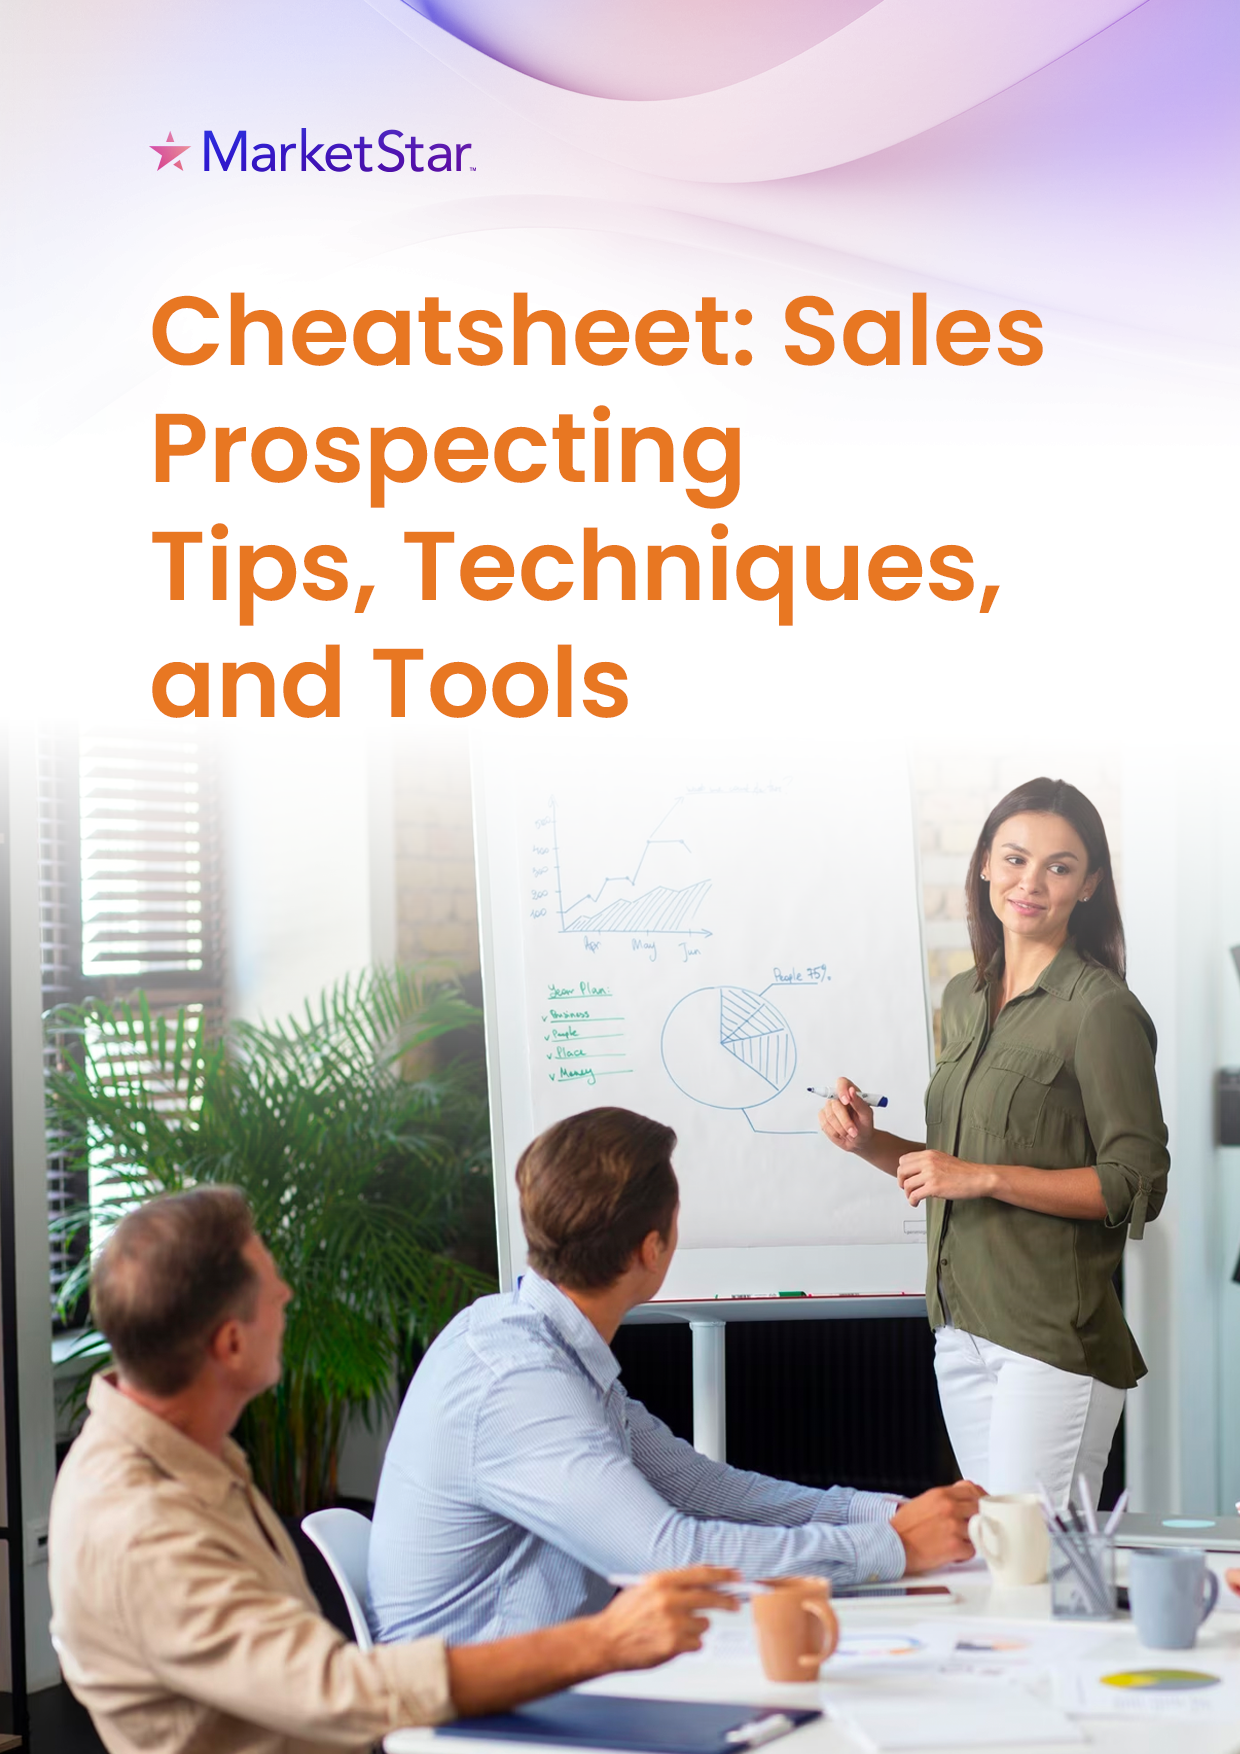 Sales Prospecting Tips, Techniques, and Tools